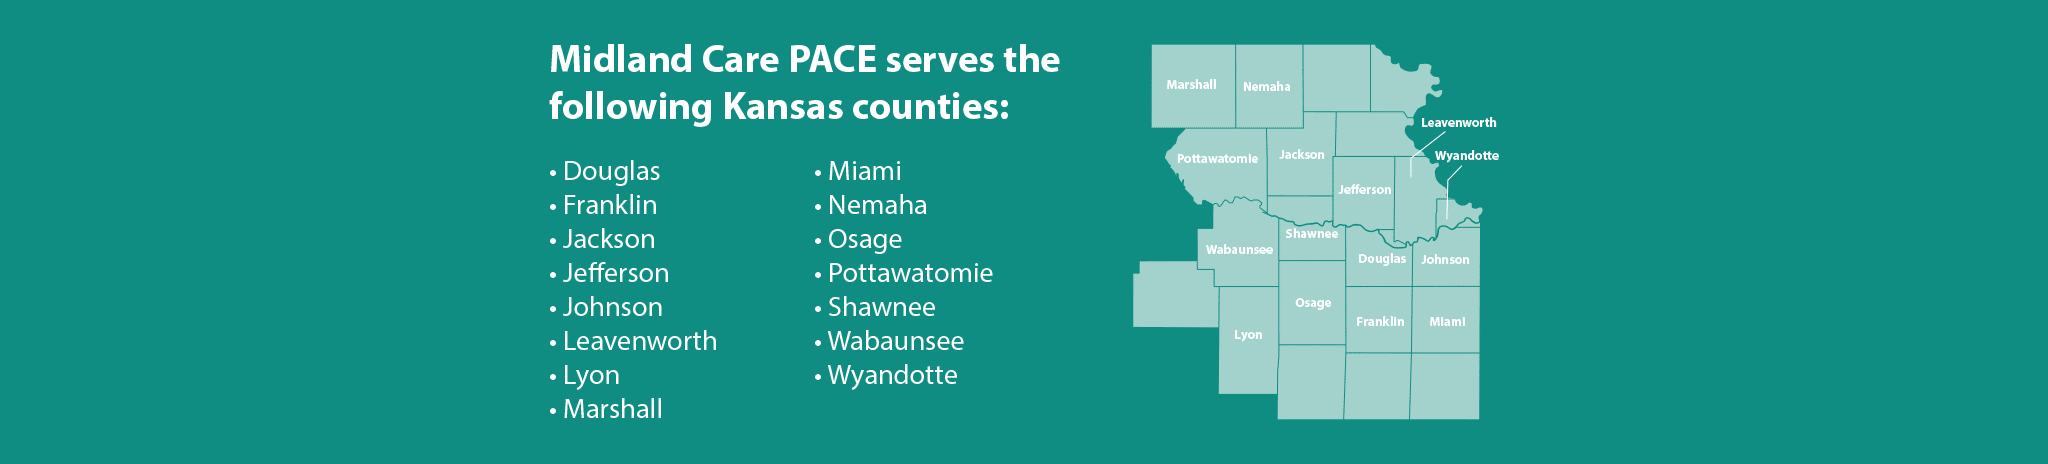 PACE WEB PAGE SERVICES MAP